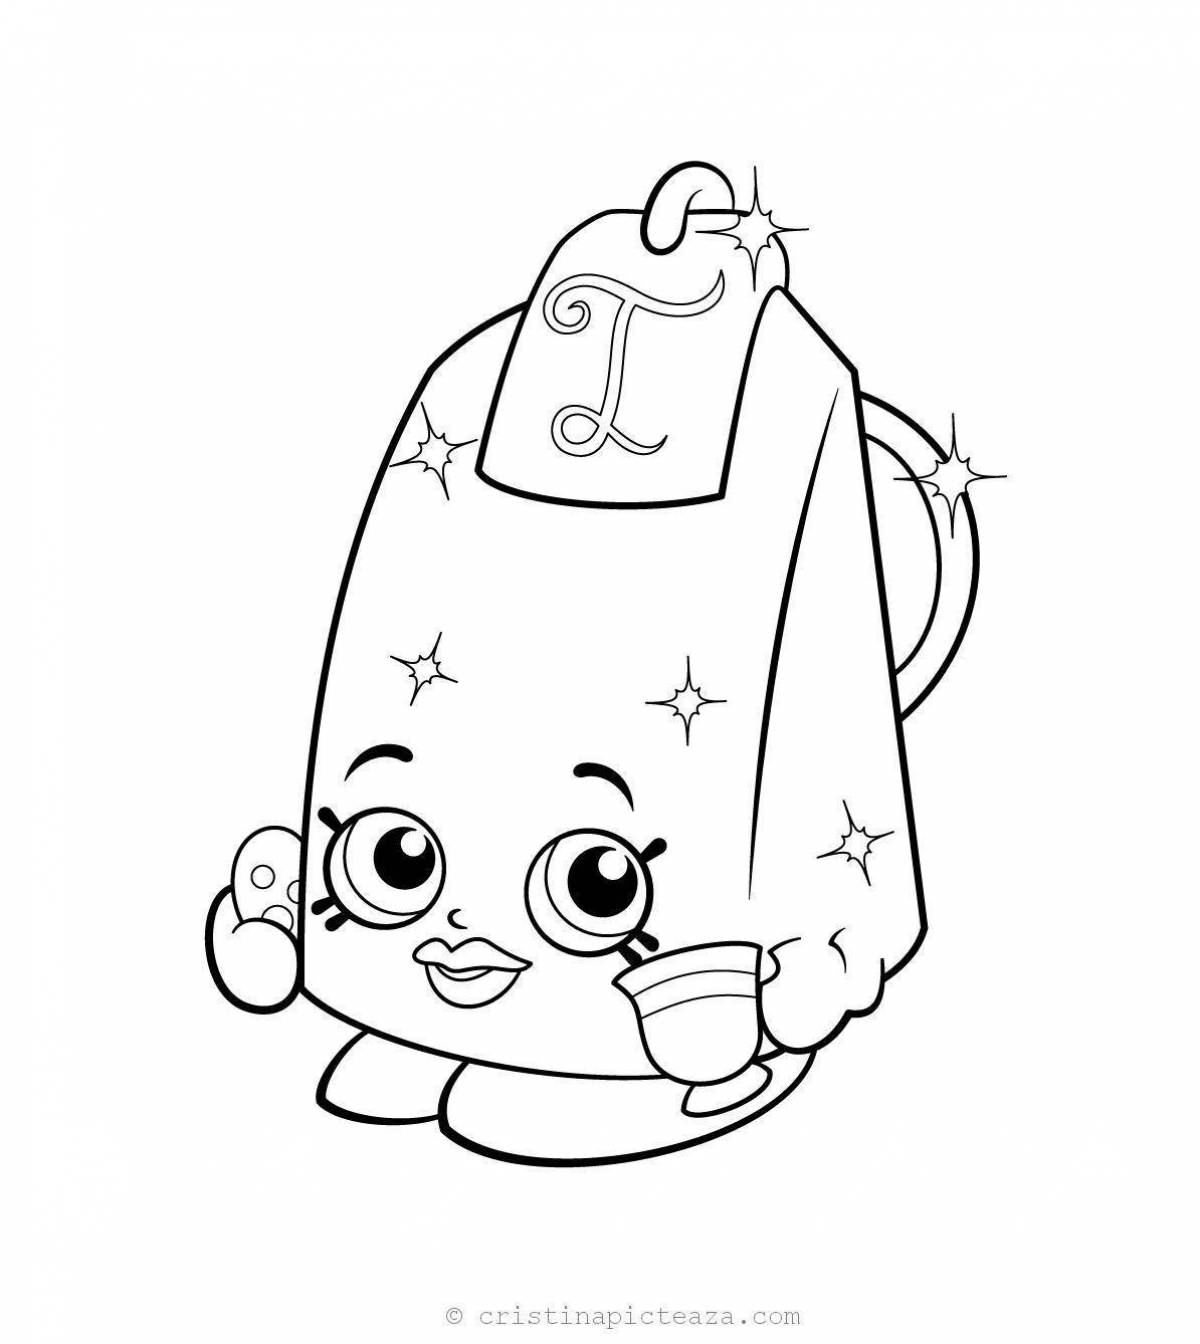 Shopkins fabulous coloring pages for kids